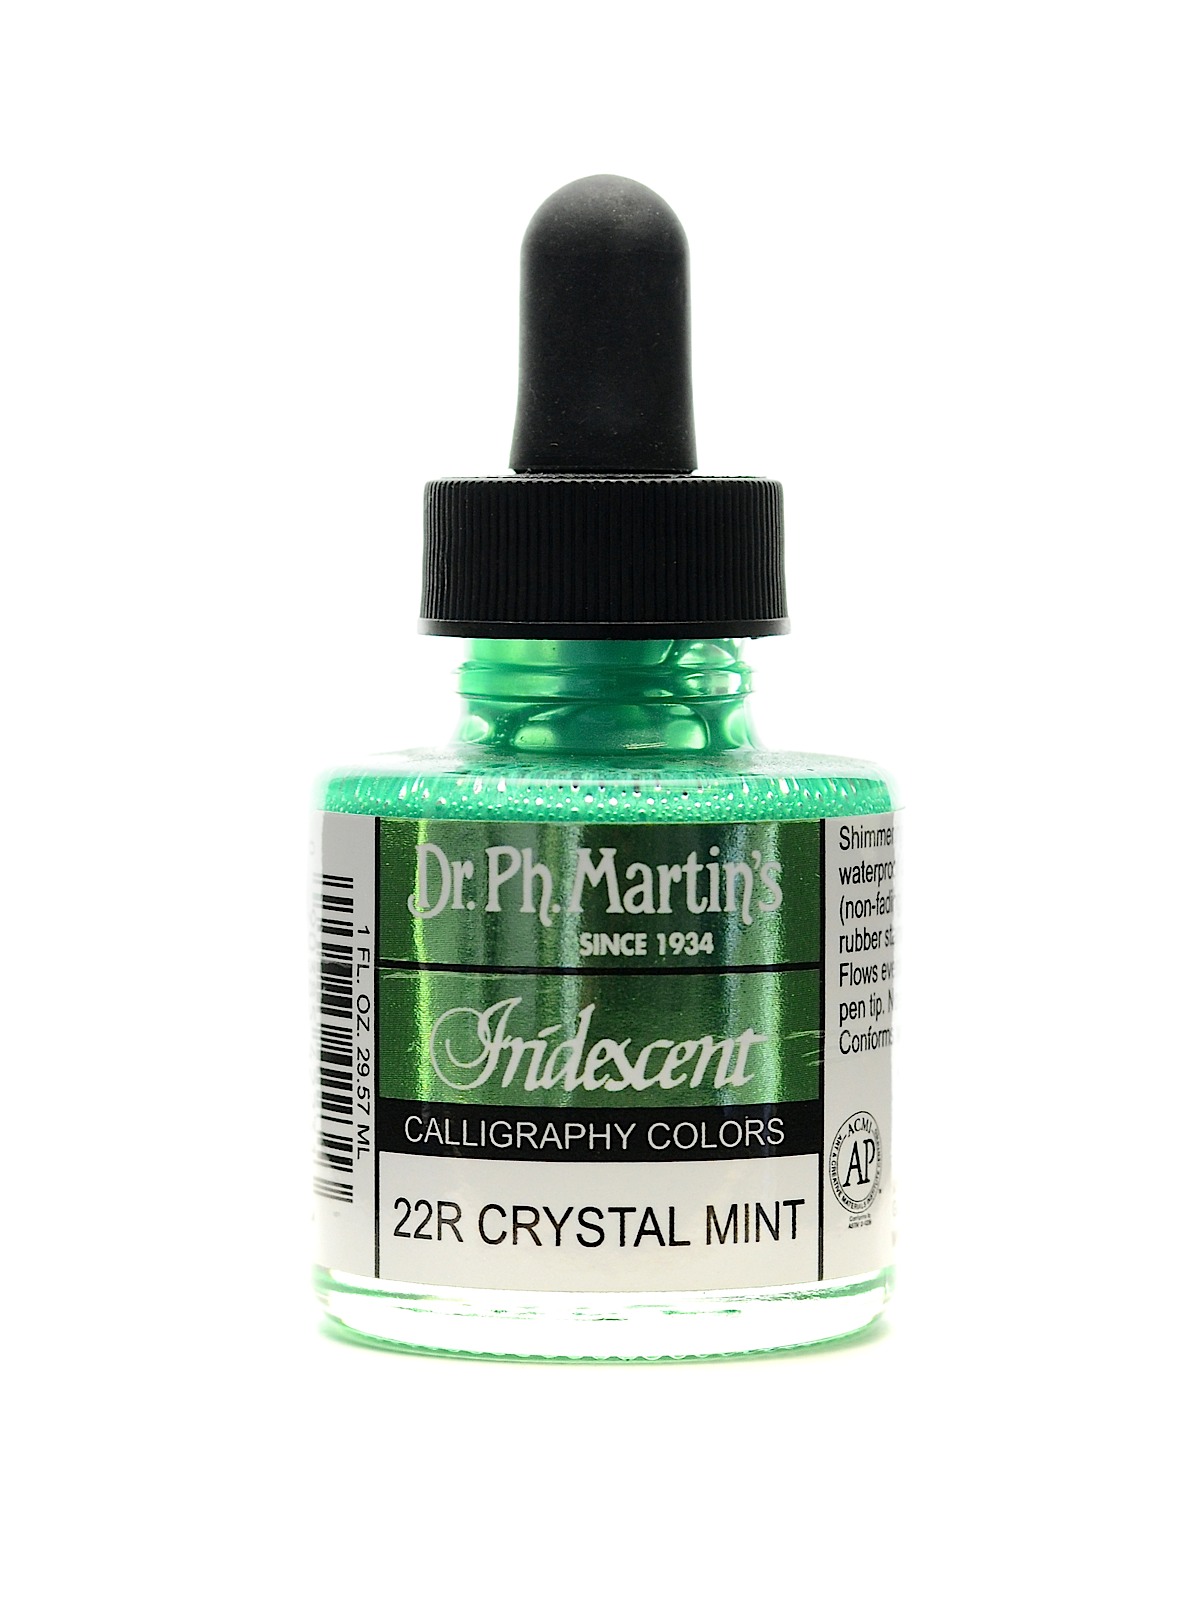 Iridescent Calligraphy Colors 1 Oz. Crystal Mint